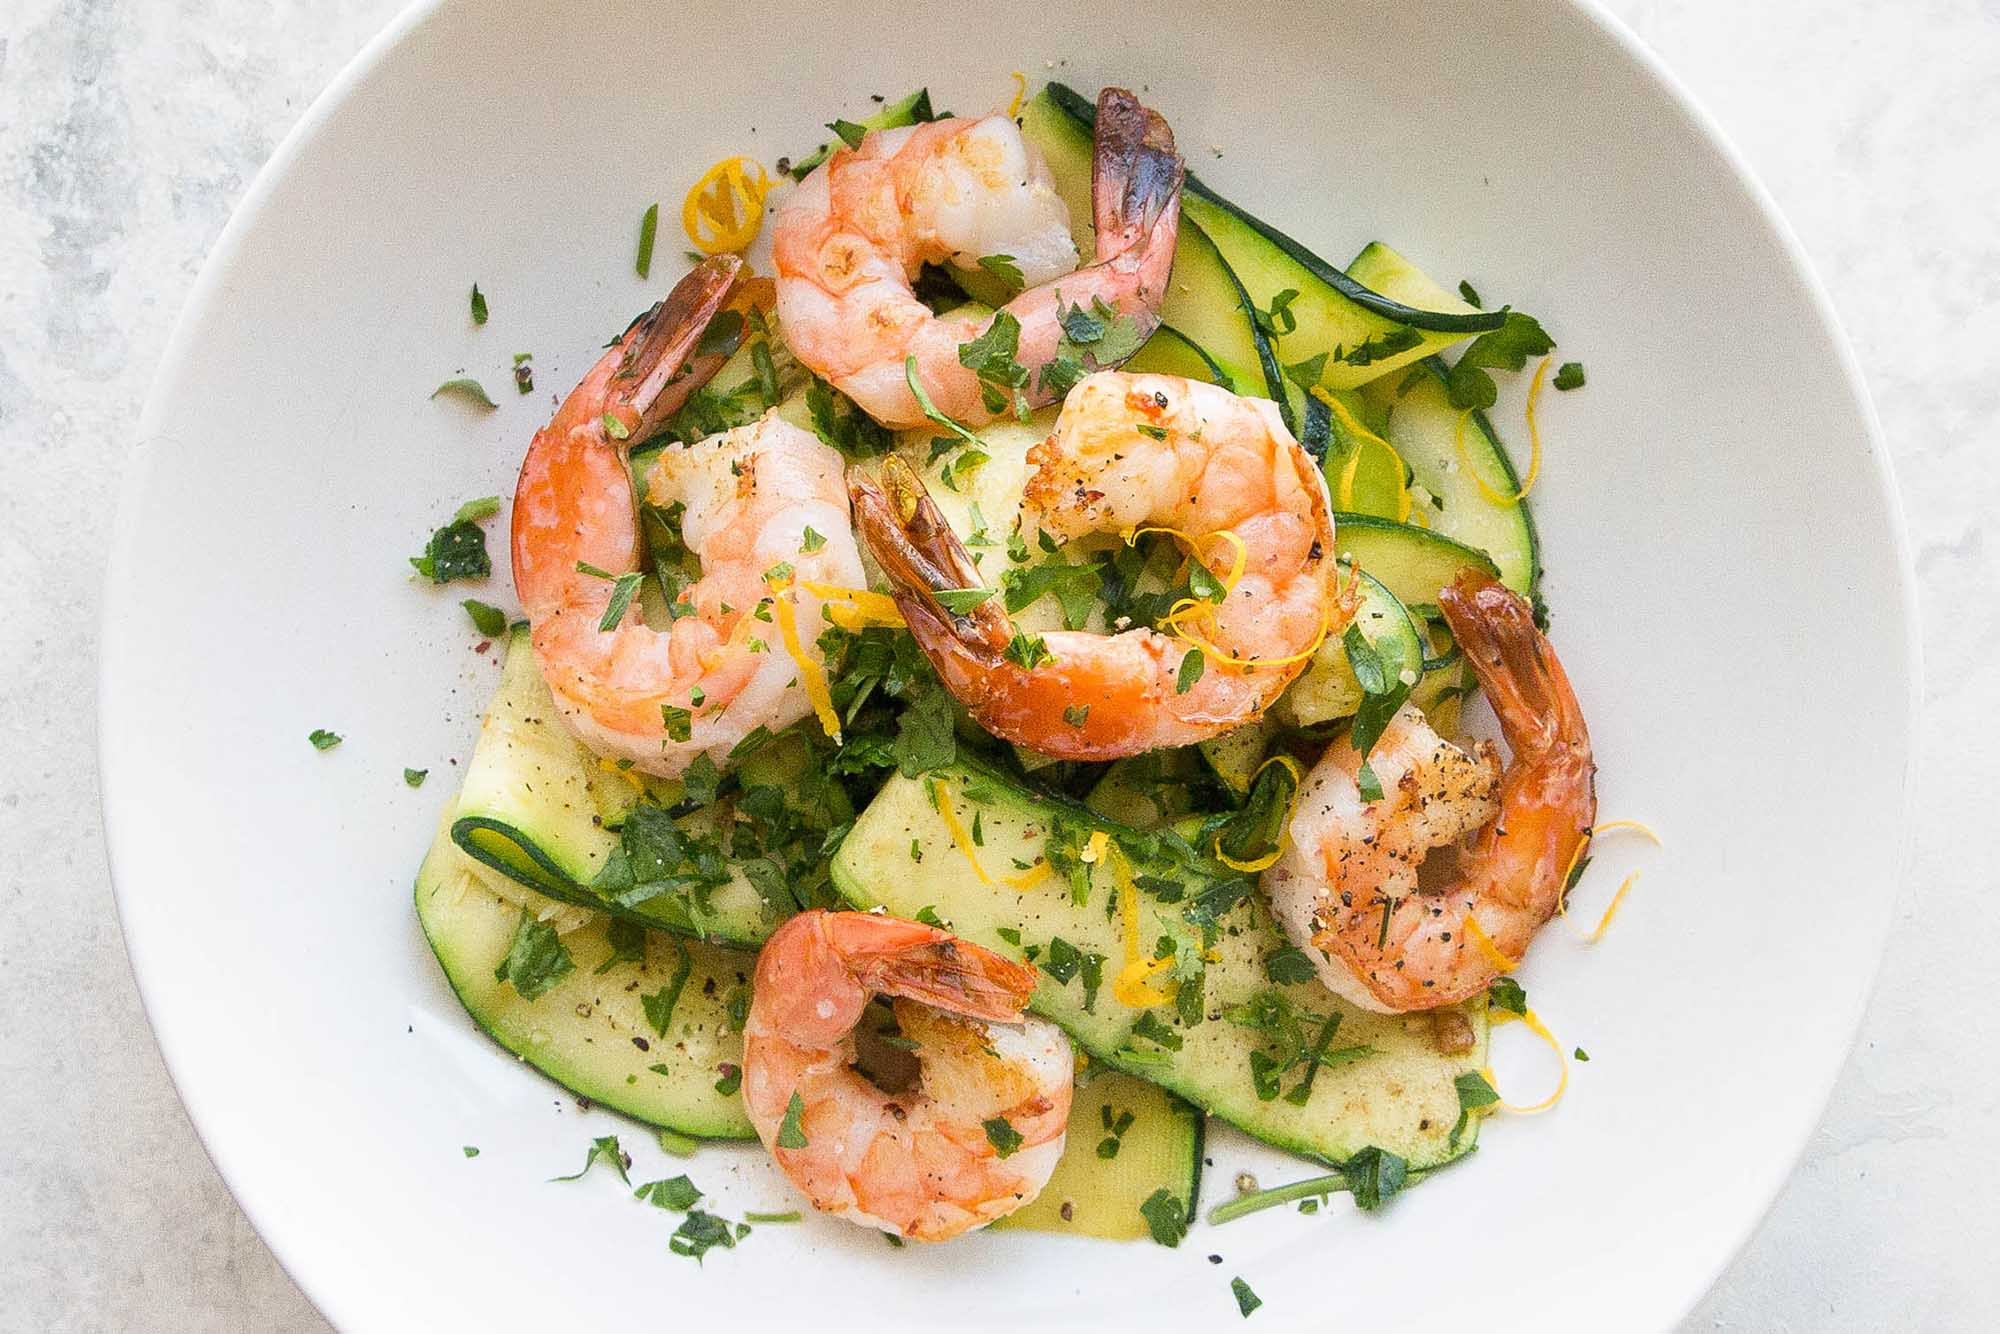 Fish And Shrimp Recipes
 Shrimp with Zucchini Noodles and Lemon Garlic Butter